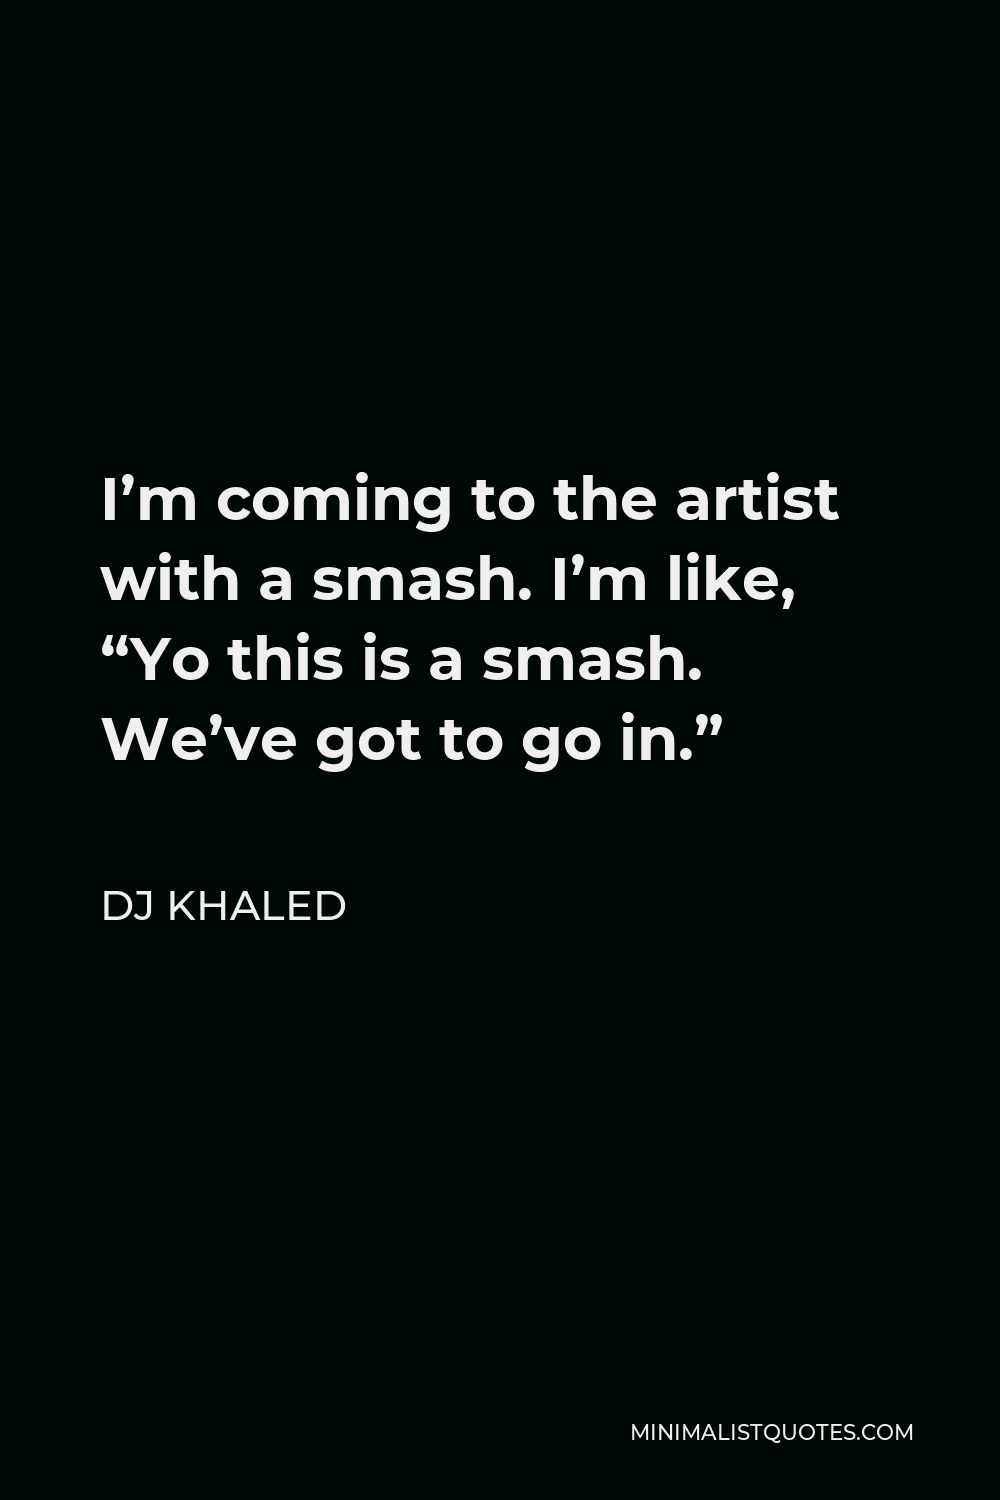 DJ Khaled Quote - I’m coming to the artist with a smash. I’m like, “Yo this is a smash. We’ve got to go in.”